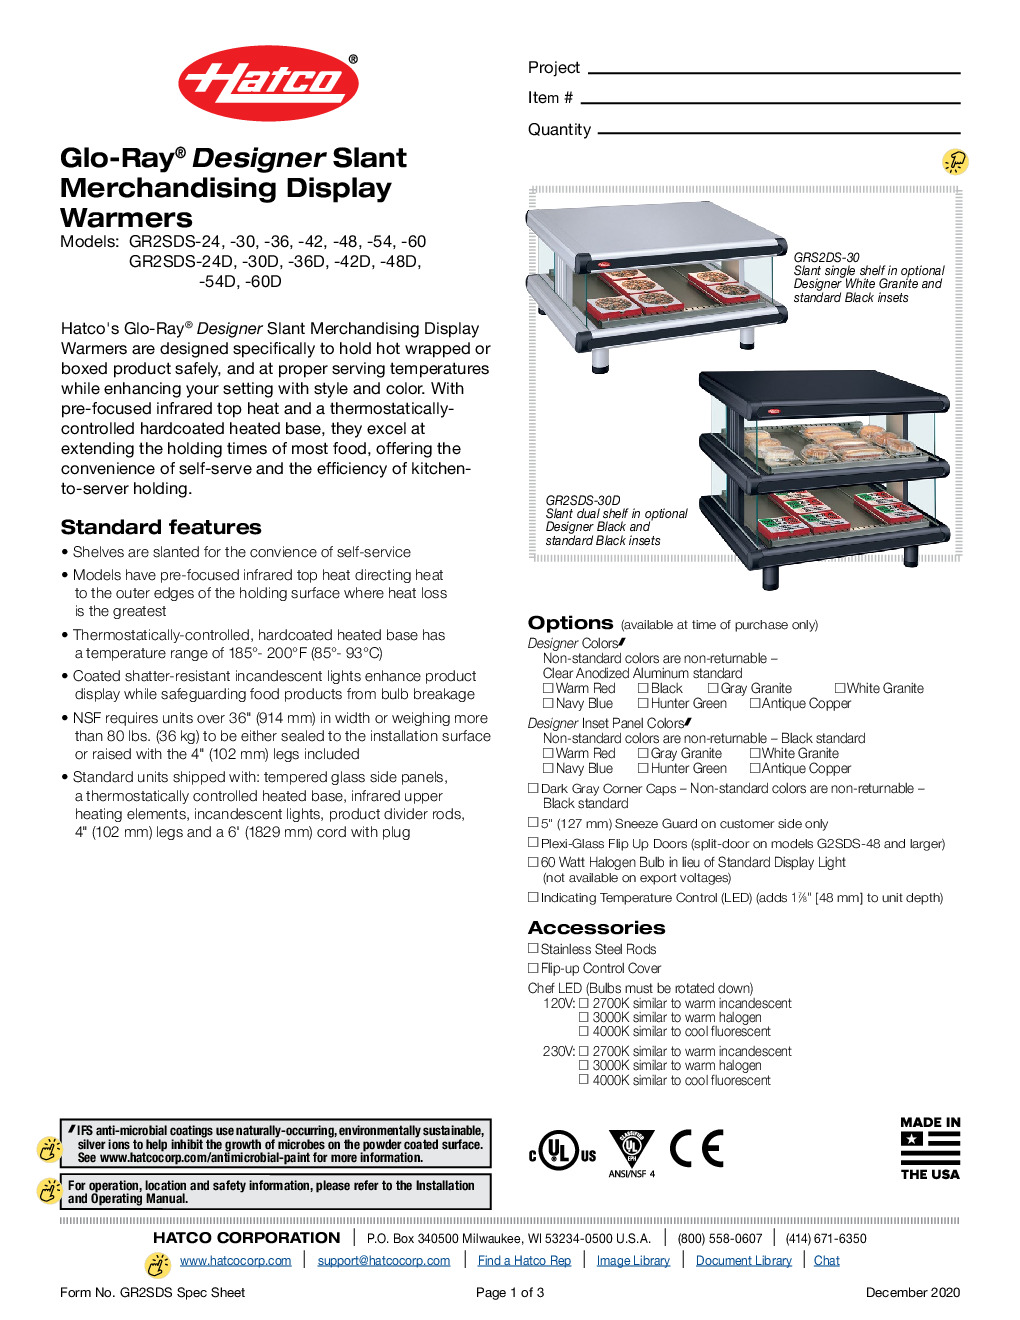 Hatco GR2SDS-42D For Multi-Product Heated Display Merchandiser